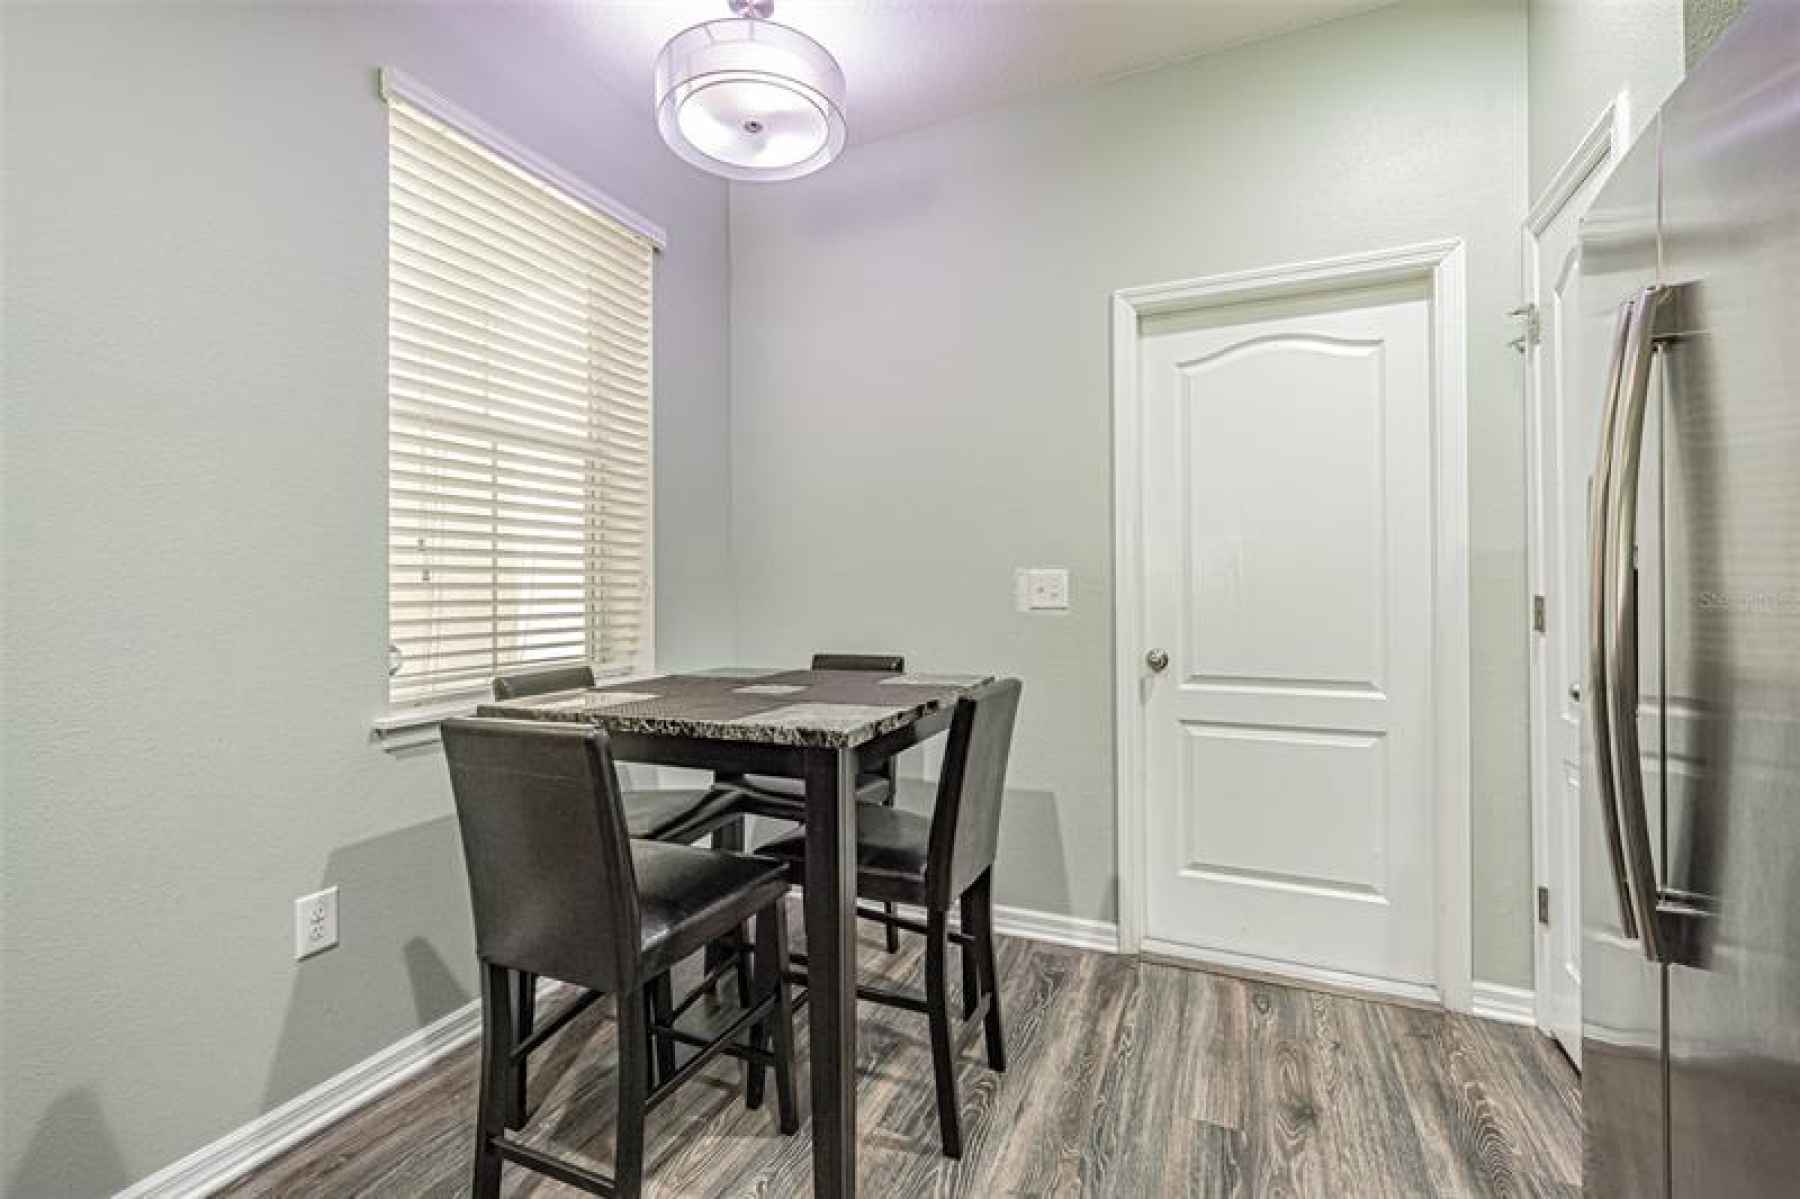 In connection to the garage entrance is a wonderful eat in kitchen with natural light.